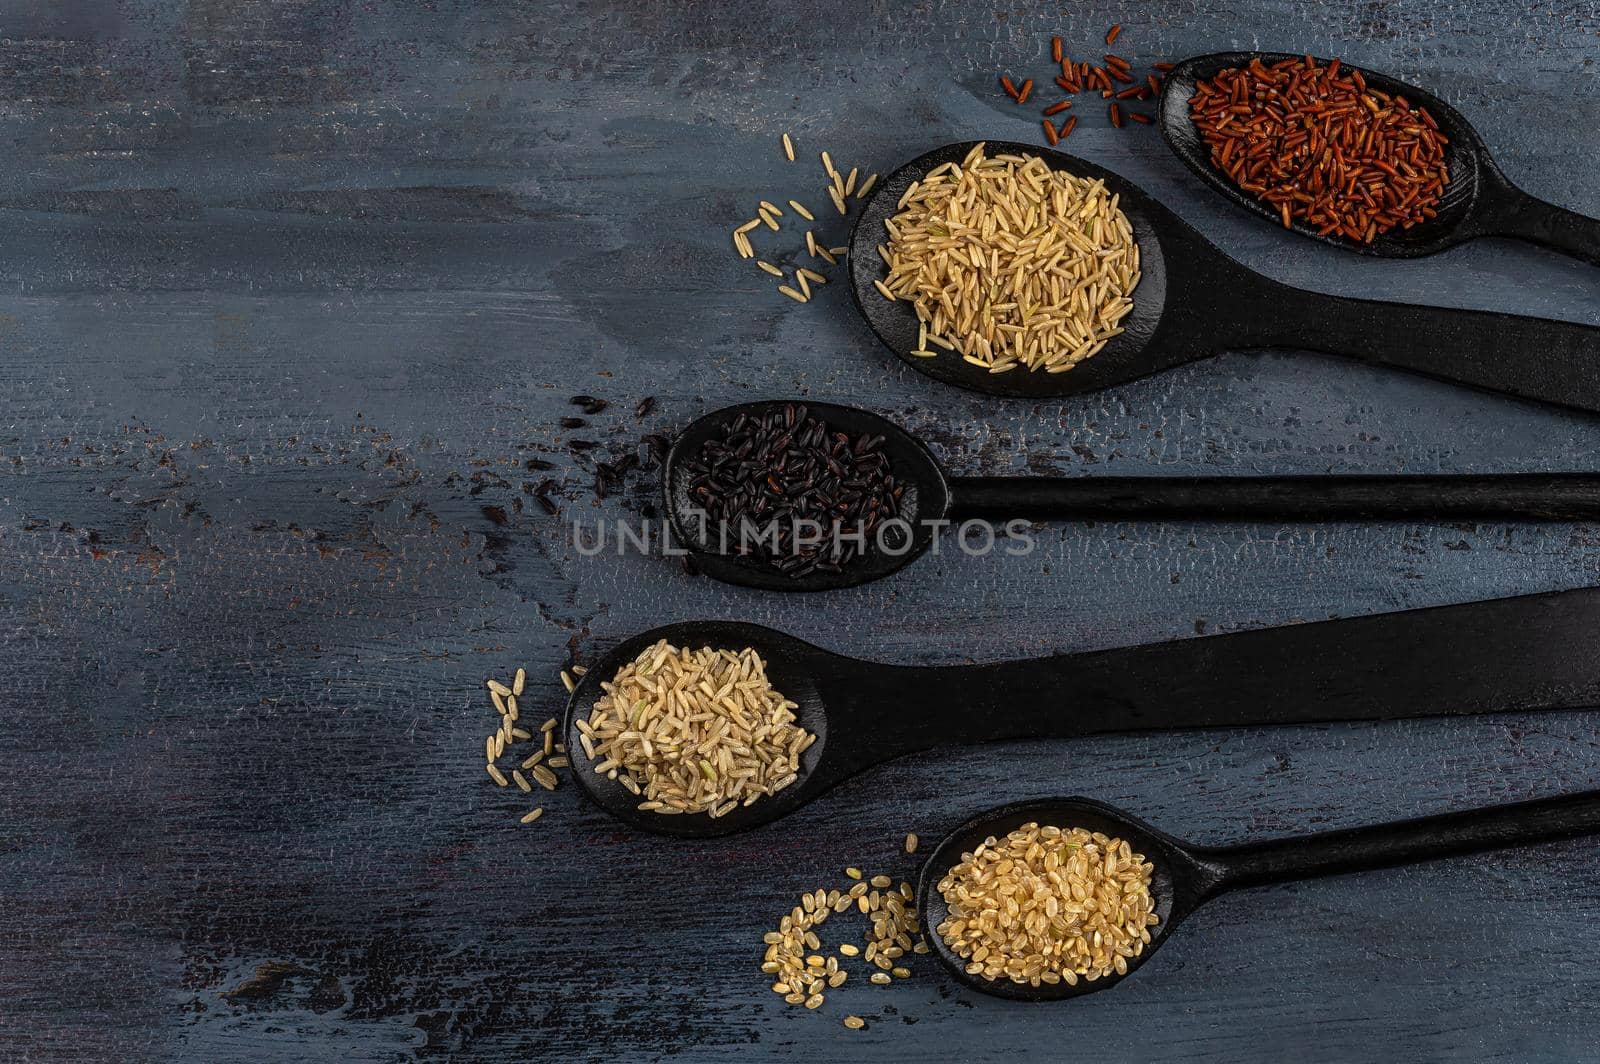 Basmati rice, long rice, black rice, round rice in wooden spoons-view from above